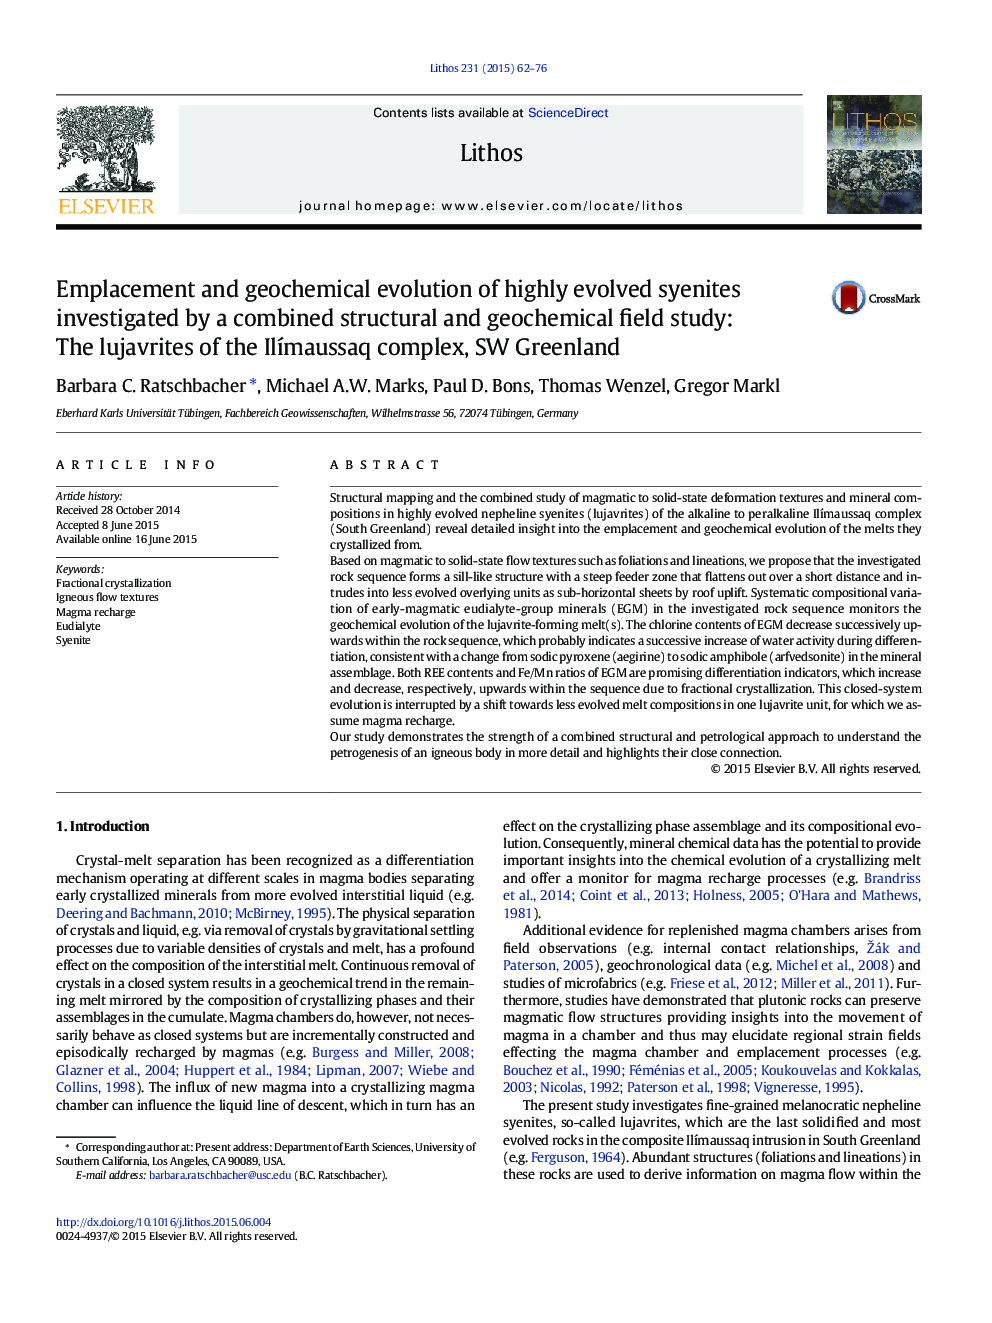 Emplacement and geochemical evolution of highly evolved syenites investigated by a combined structural and geochemical field study: The lujavrites of the Ilímaussaq complex, SW Greenland